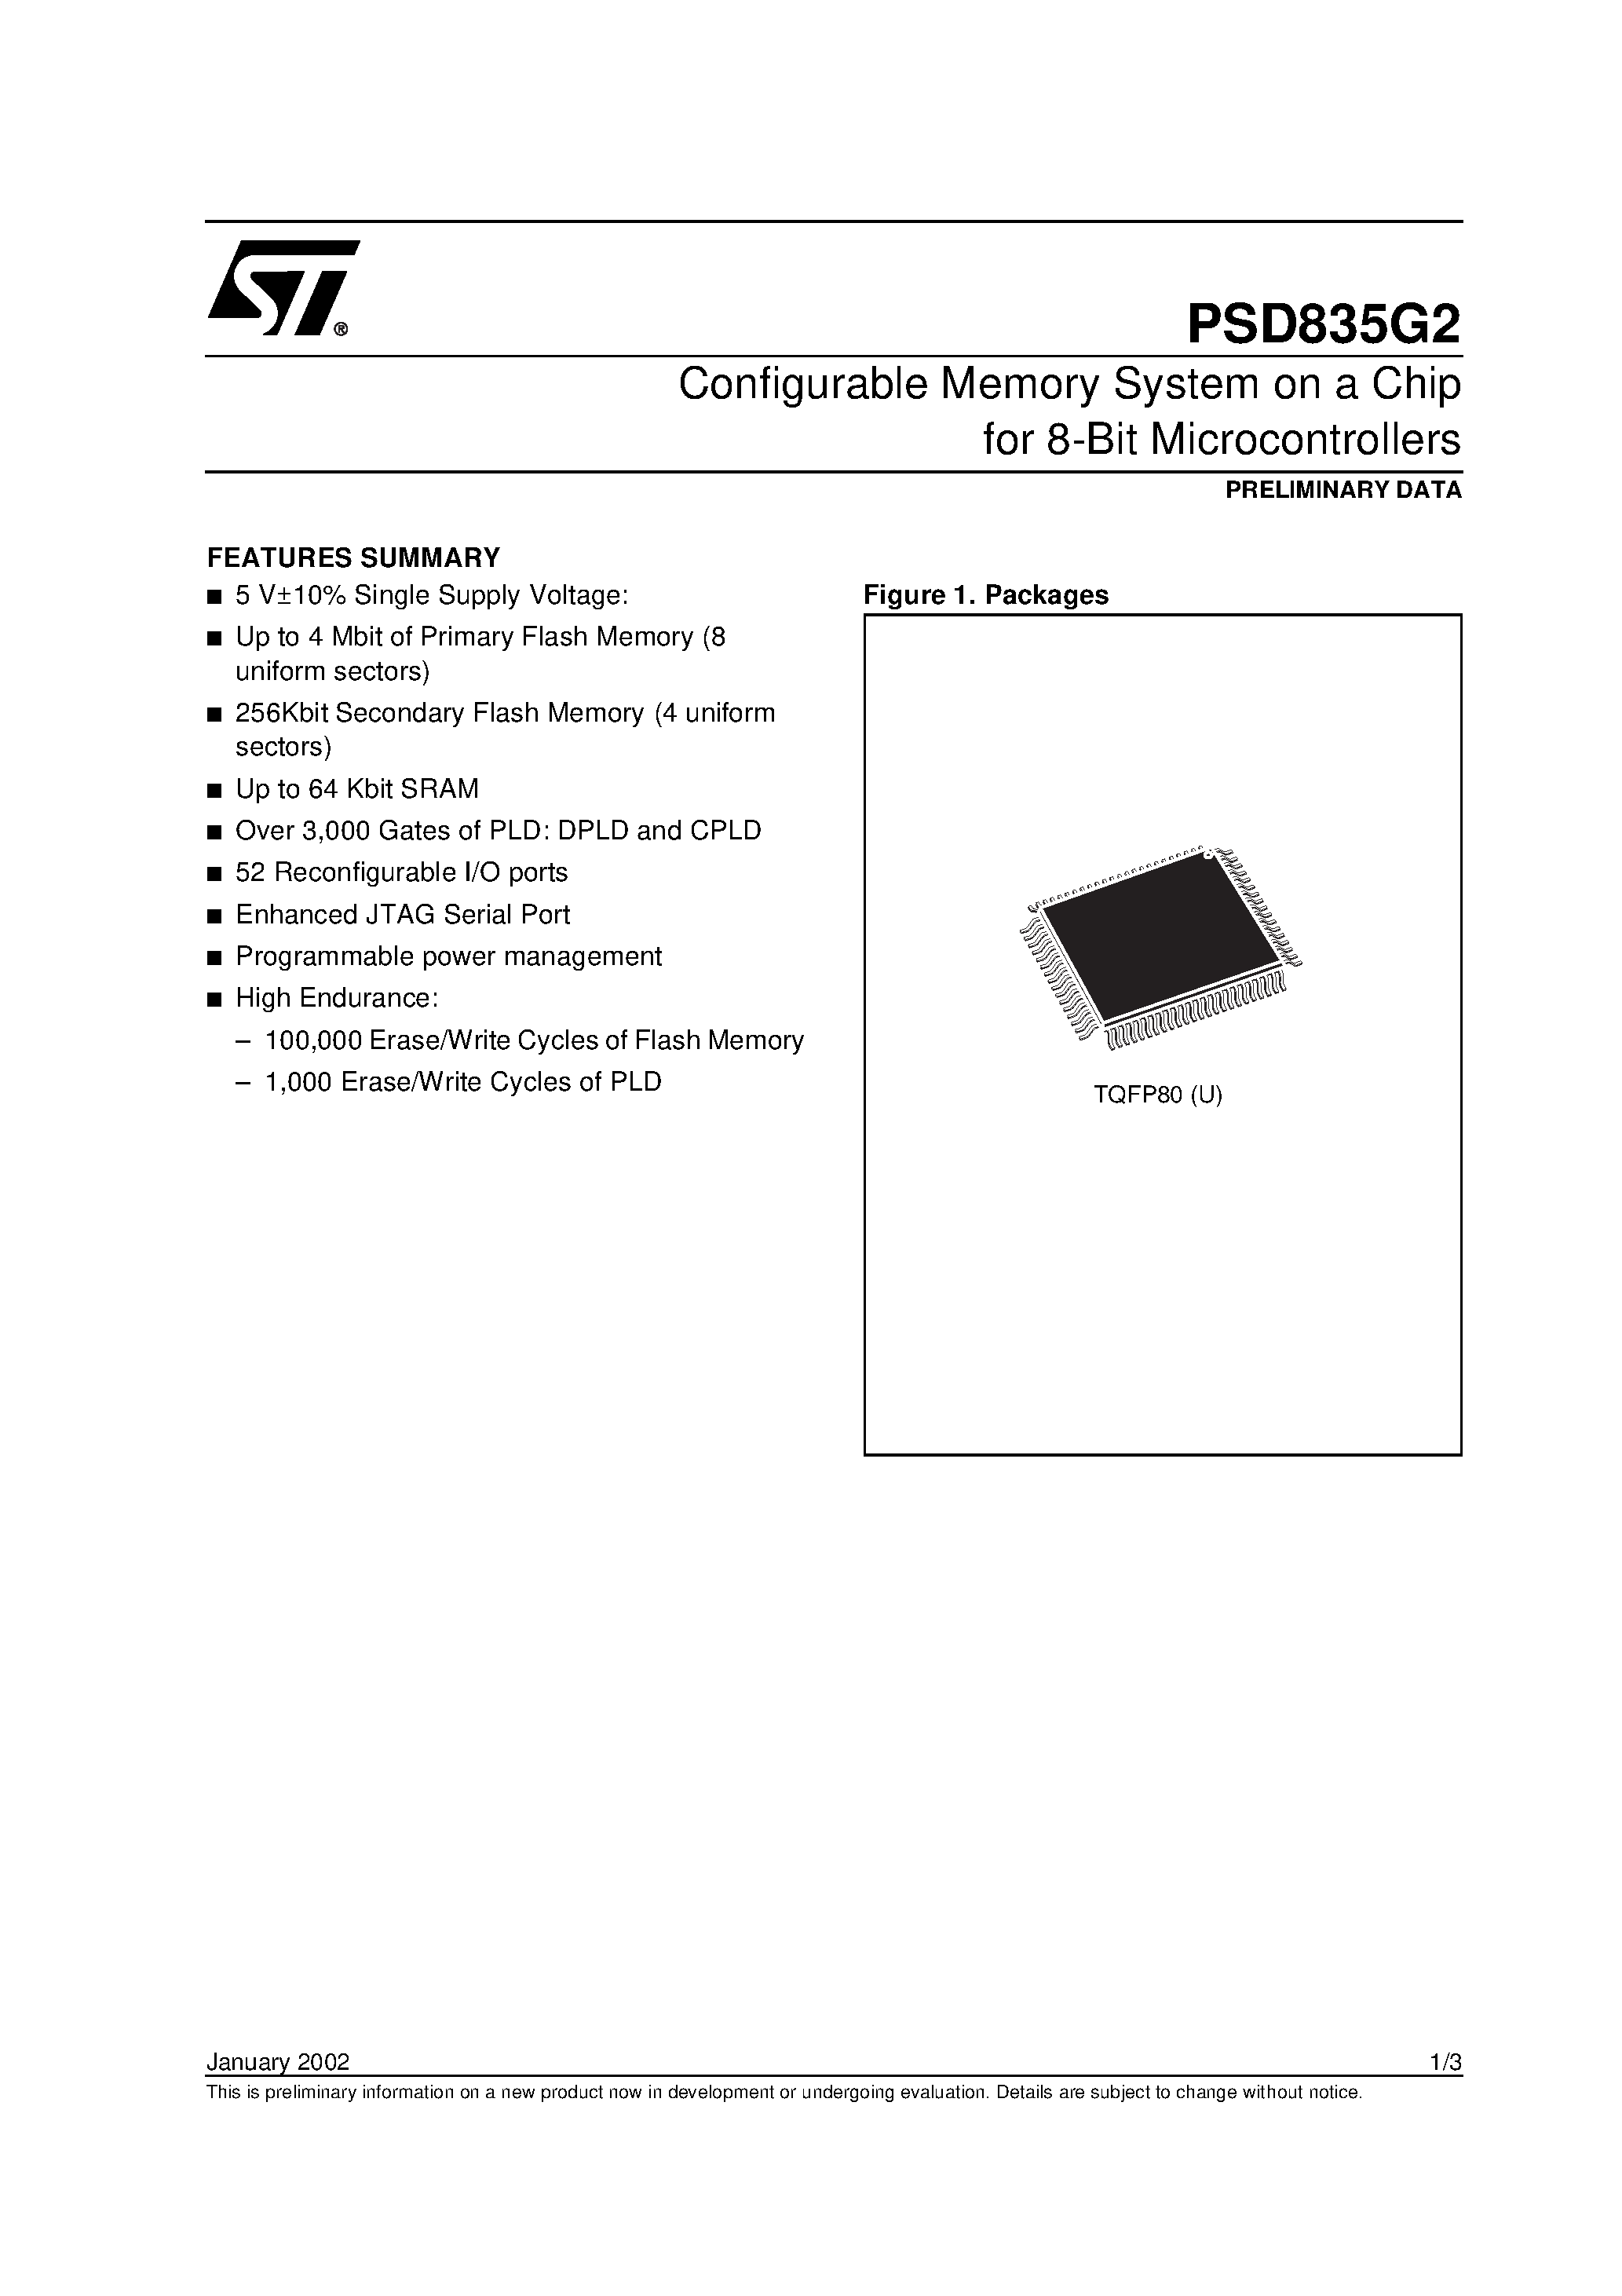 Datasheet PSD835F2-A-15J - Configurable Memory System on a Chip for 8-Bit Microcontrollers page 1